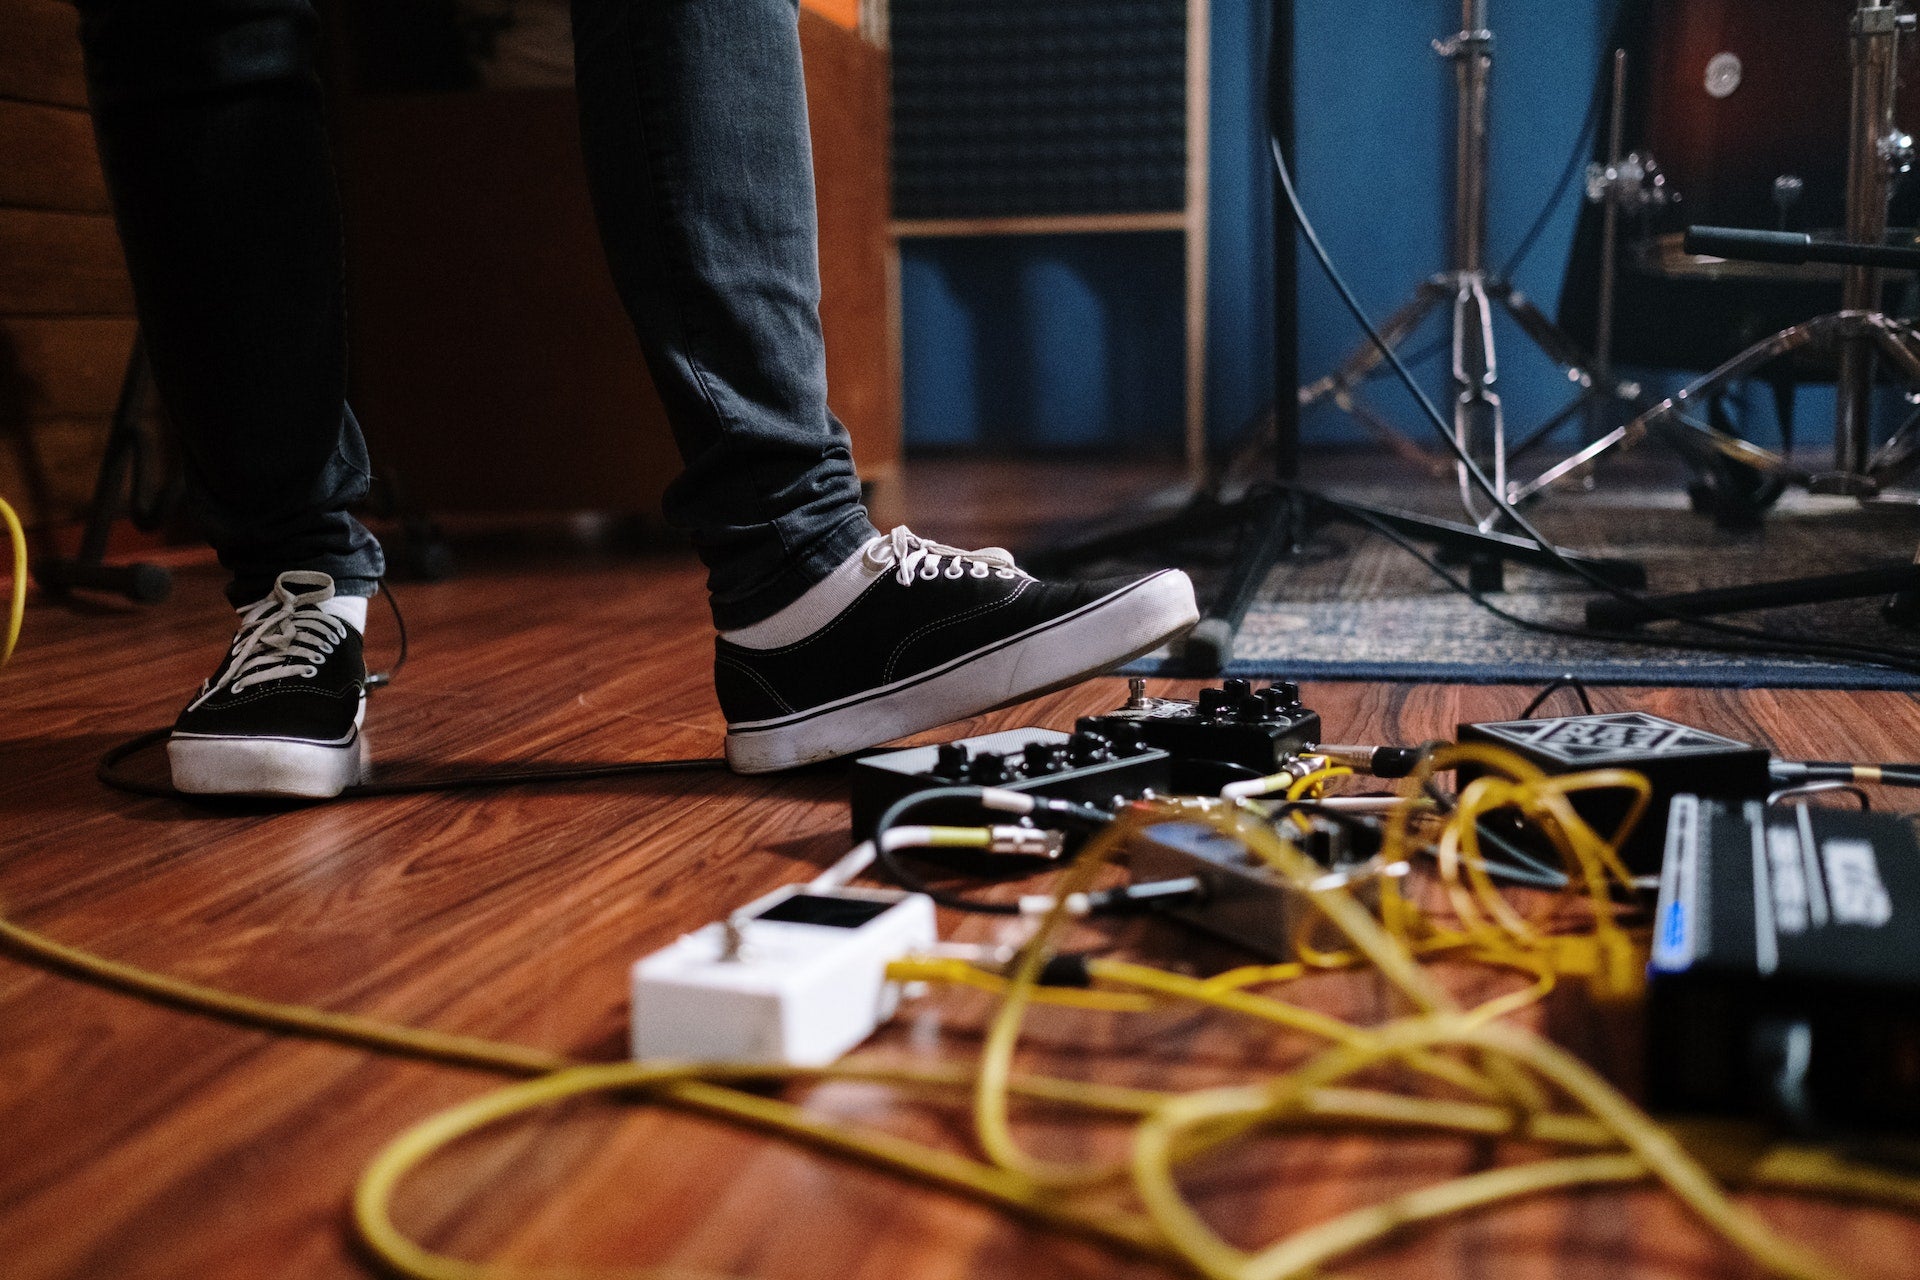 Guitarist's Guide: How Audio Cables Impact Tone & Performance